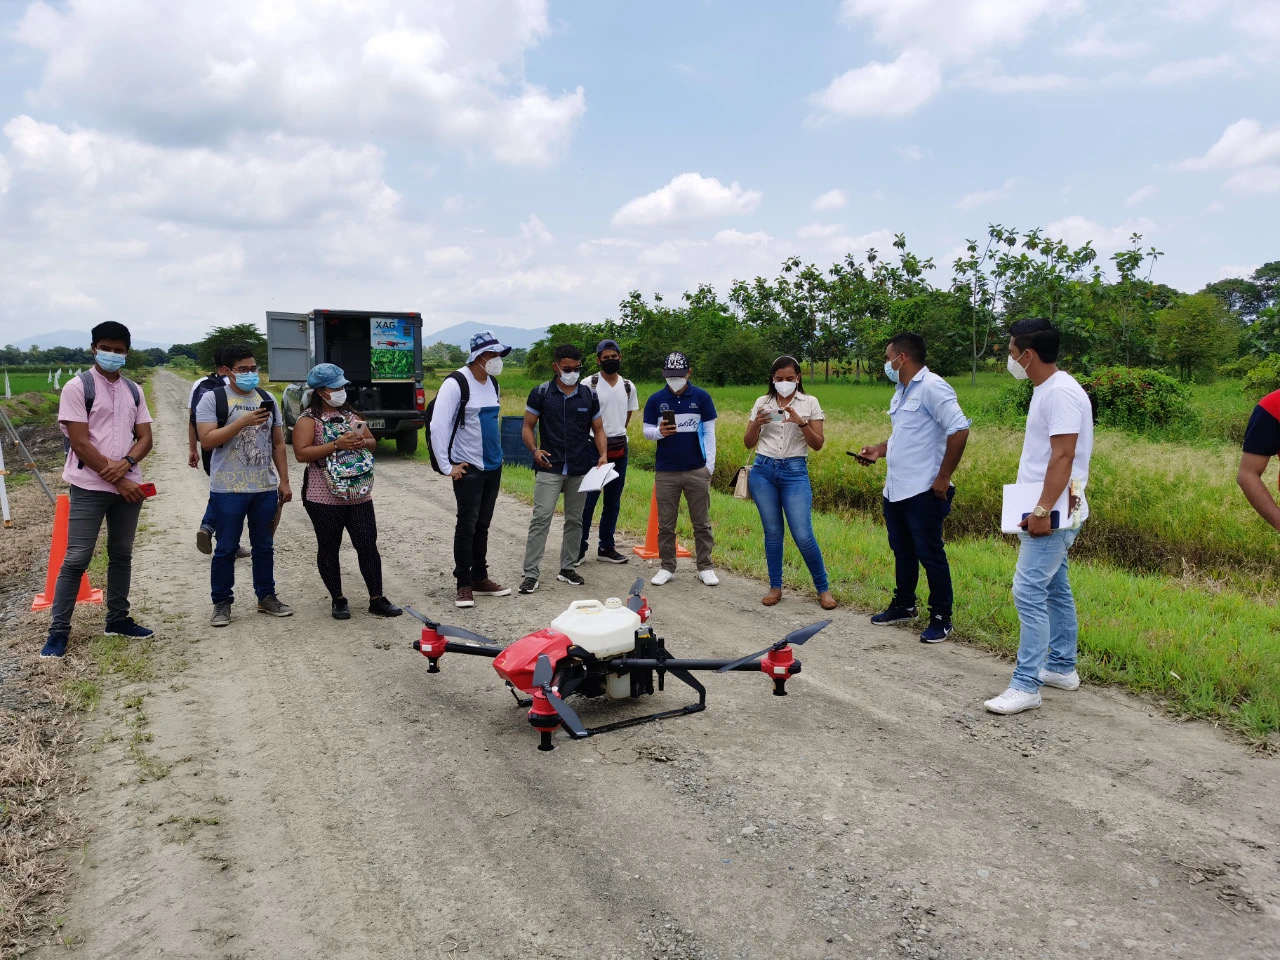 Practical drone training curriculum for students in Ecuador (source: Megadrone SA)